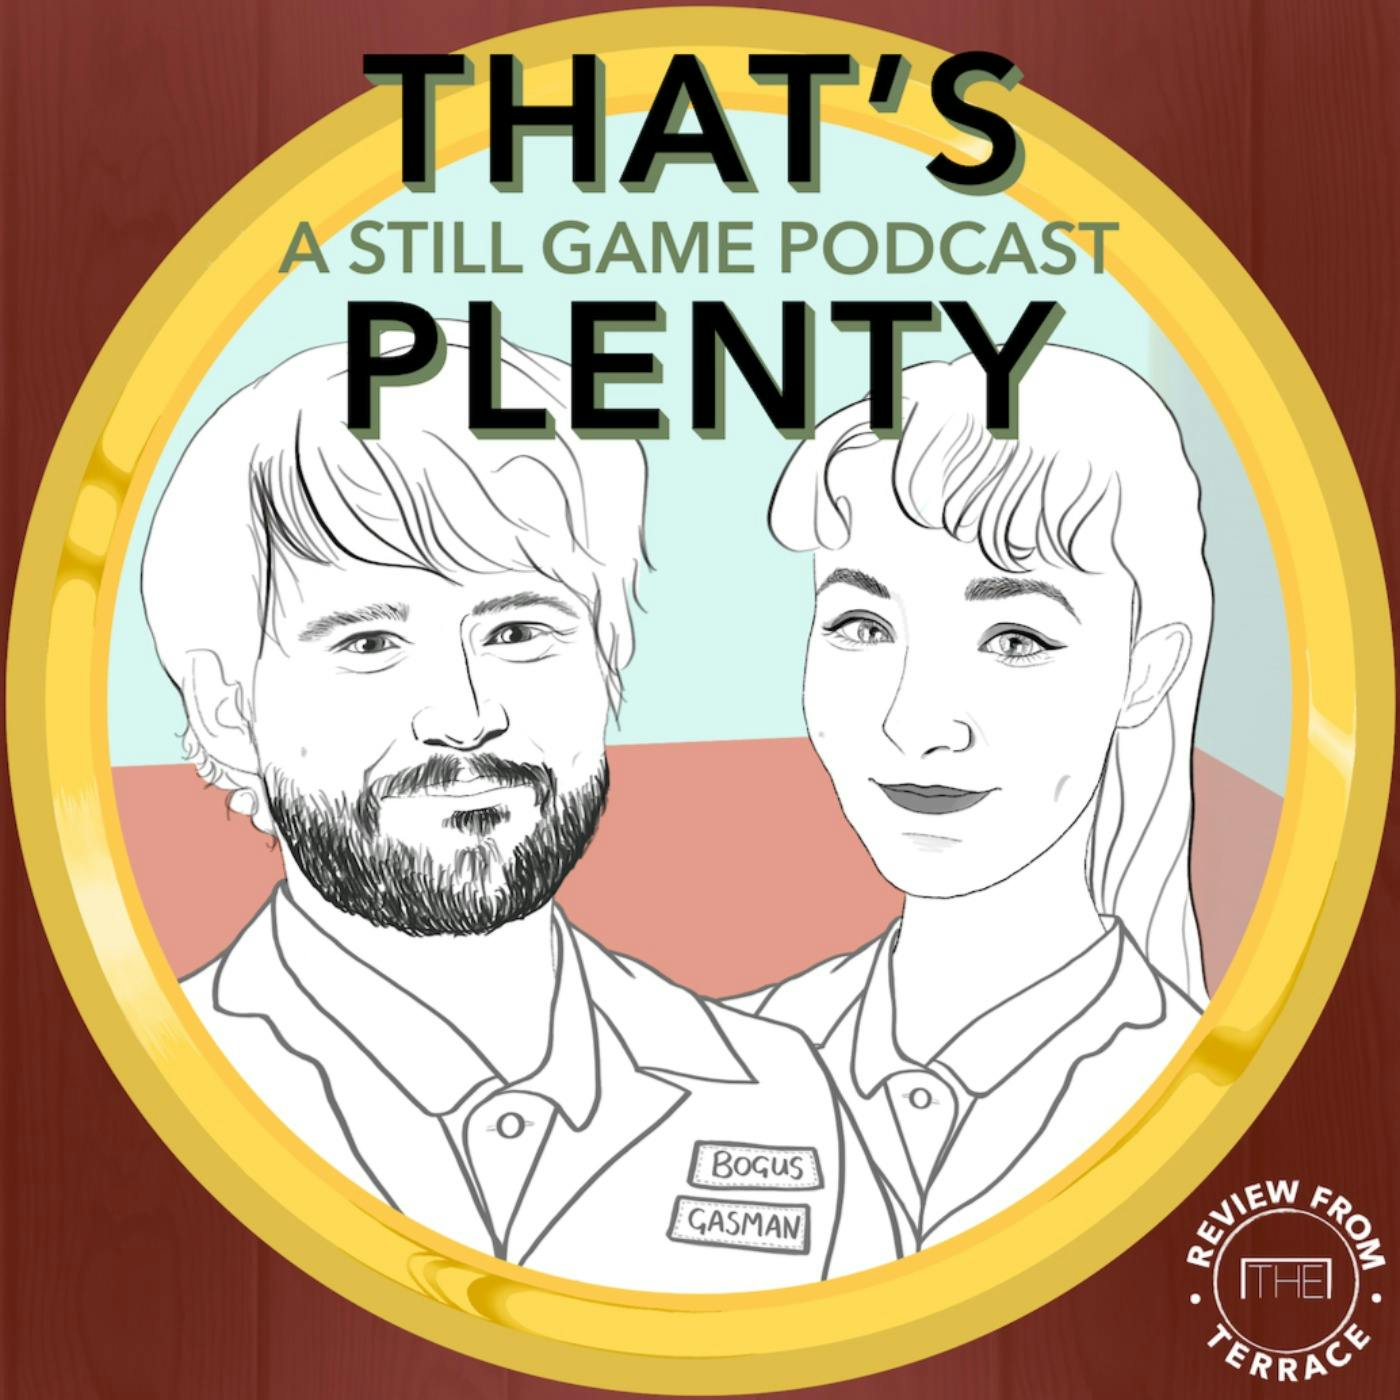 Introducing... That's Plenty: A Still Game Podcast